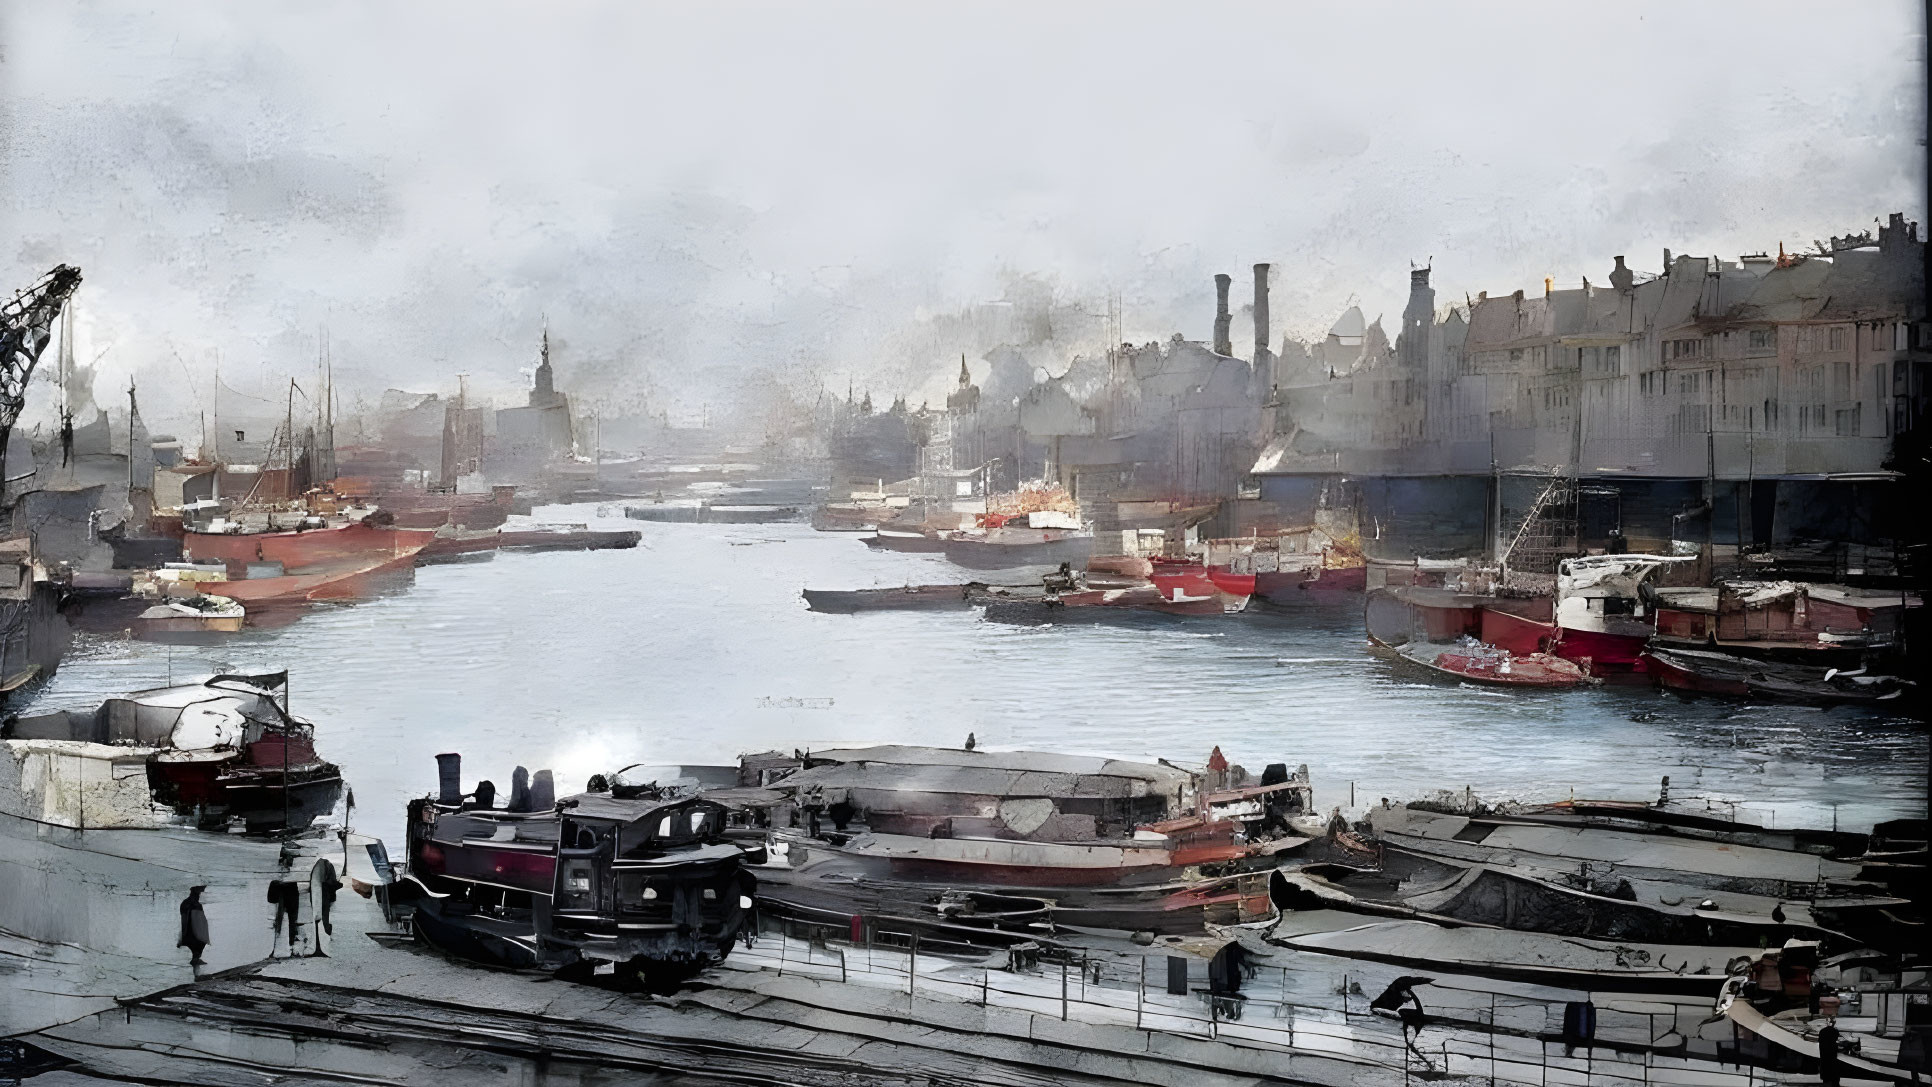 Industrial port scene with boats, train, people, factories, and cranes